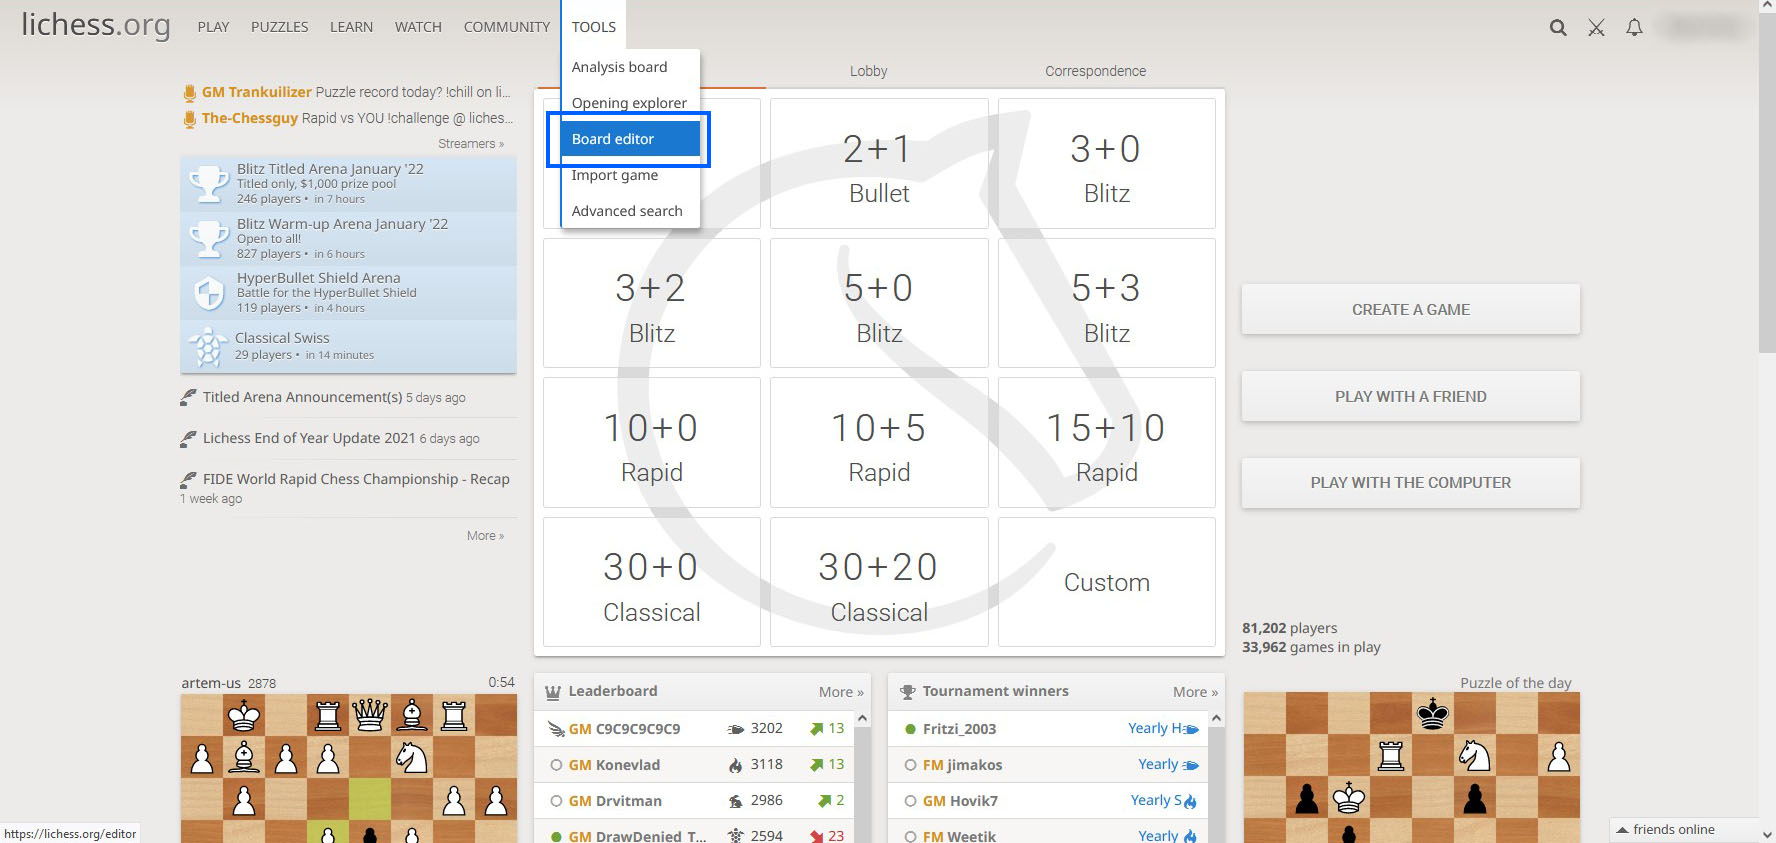 lichess.org on X: @kuntalmajumdar From the analysis board, go to FEN & PGN  then Share as a GIF  / X